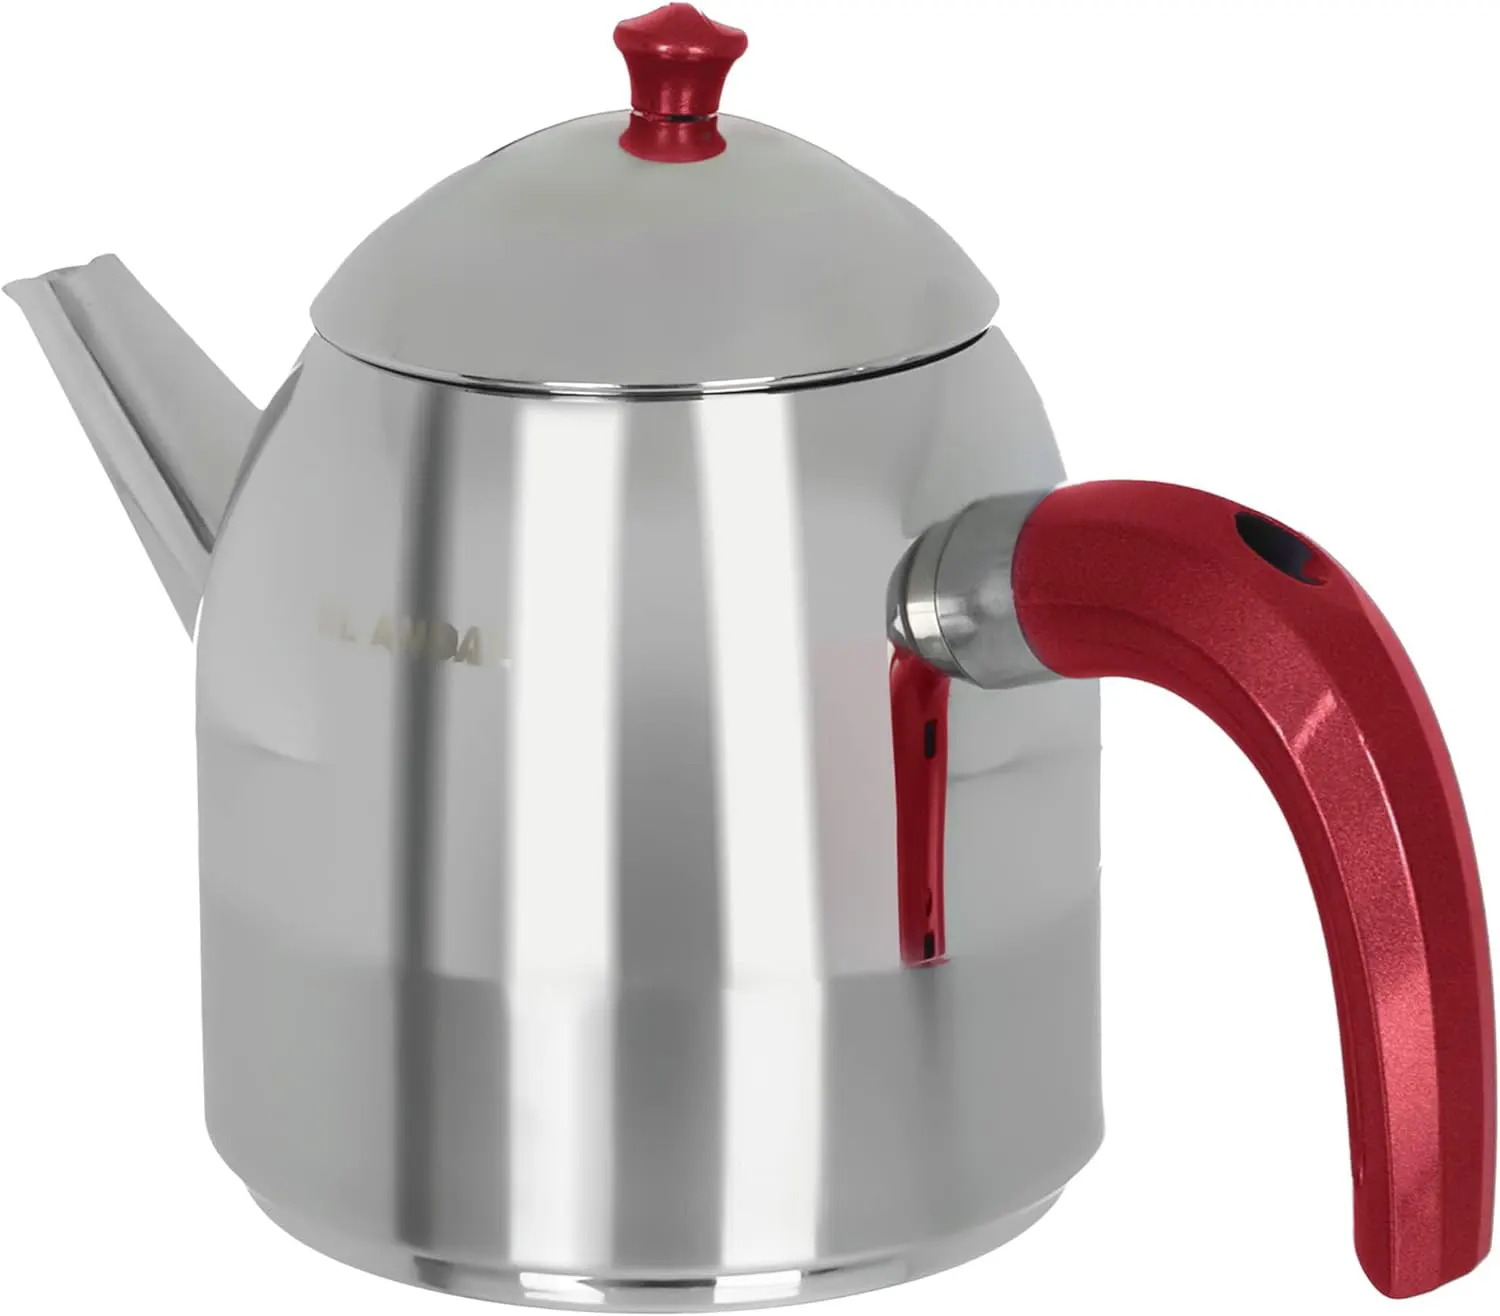 Al-Andalos Stainless tea pot , 1.5 liters, silver with red handle